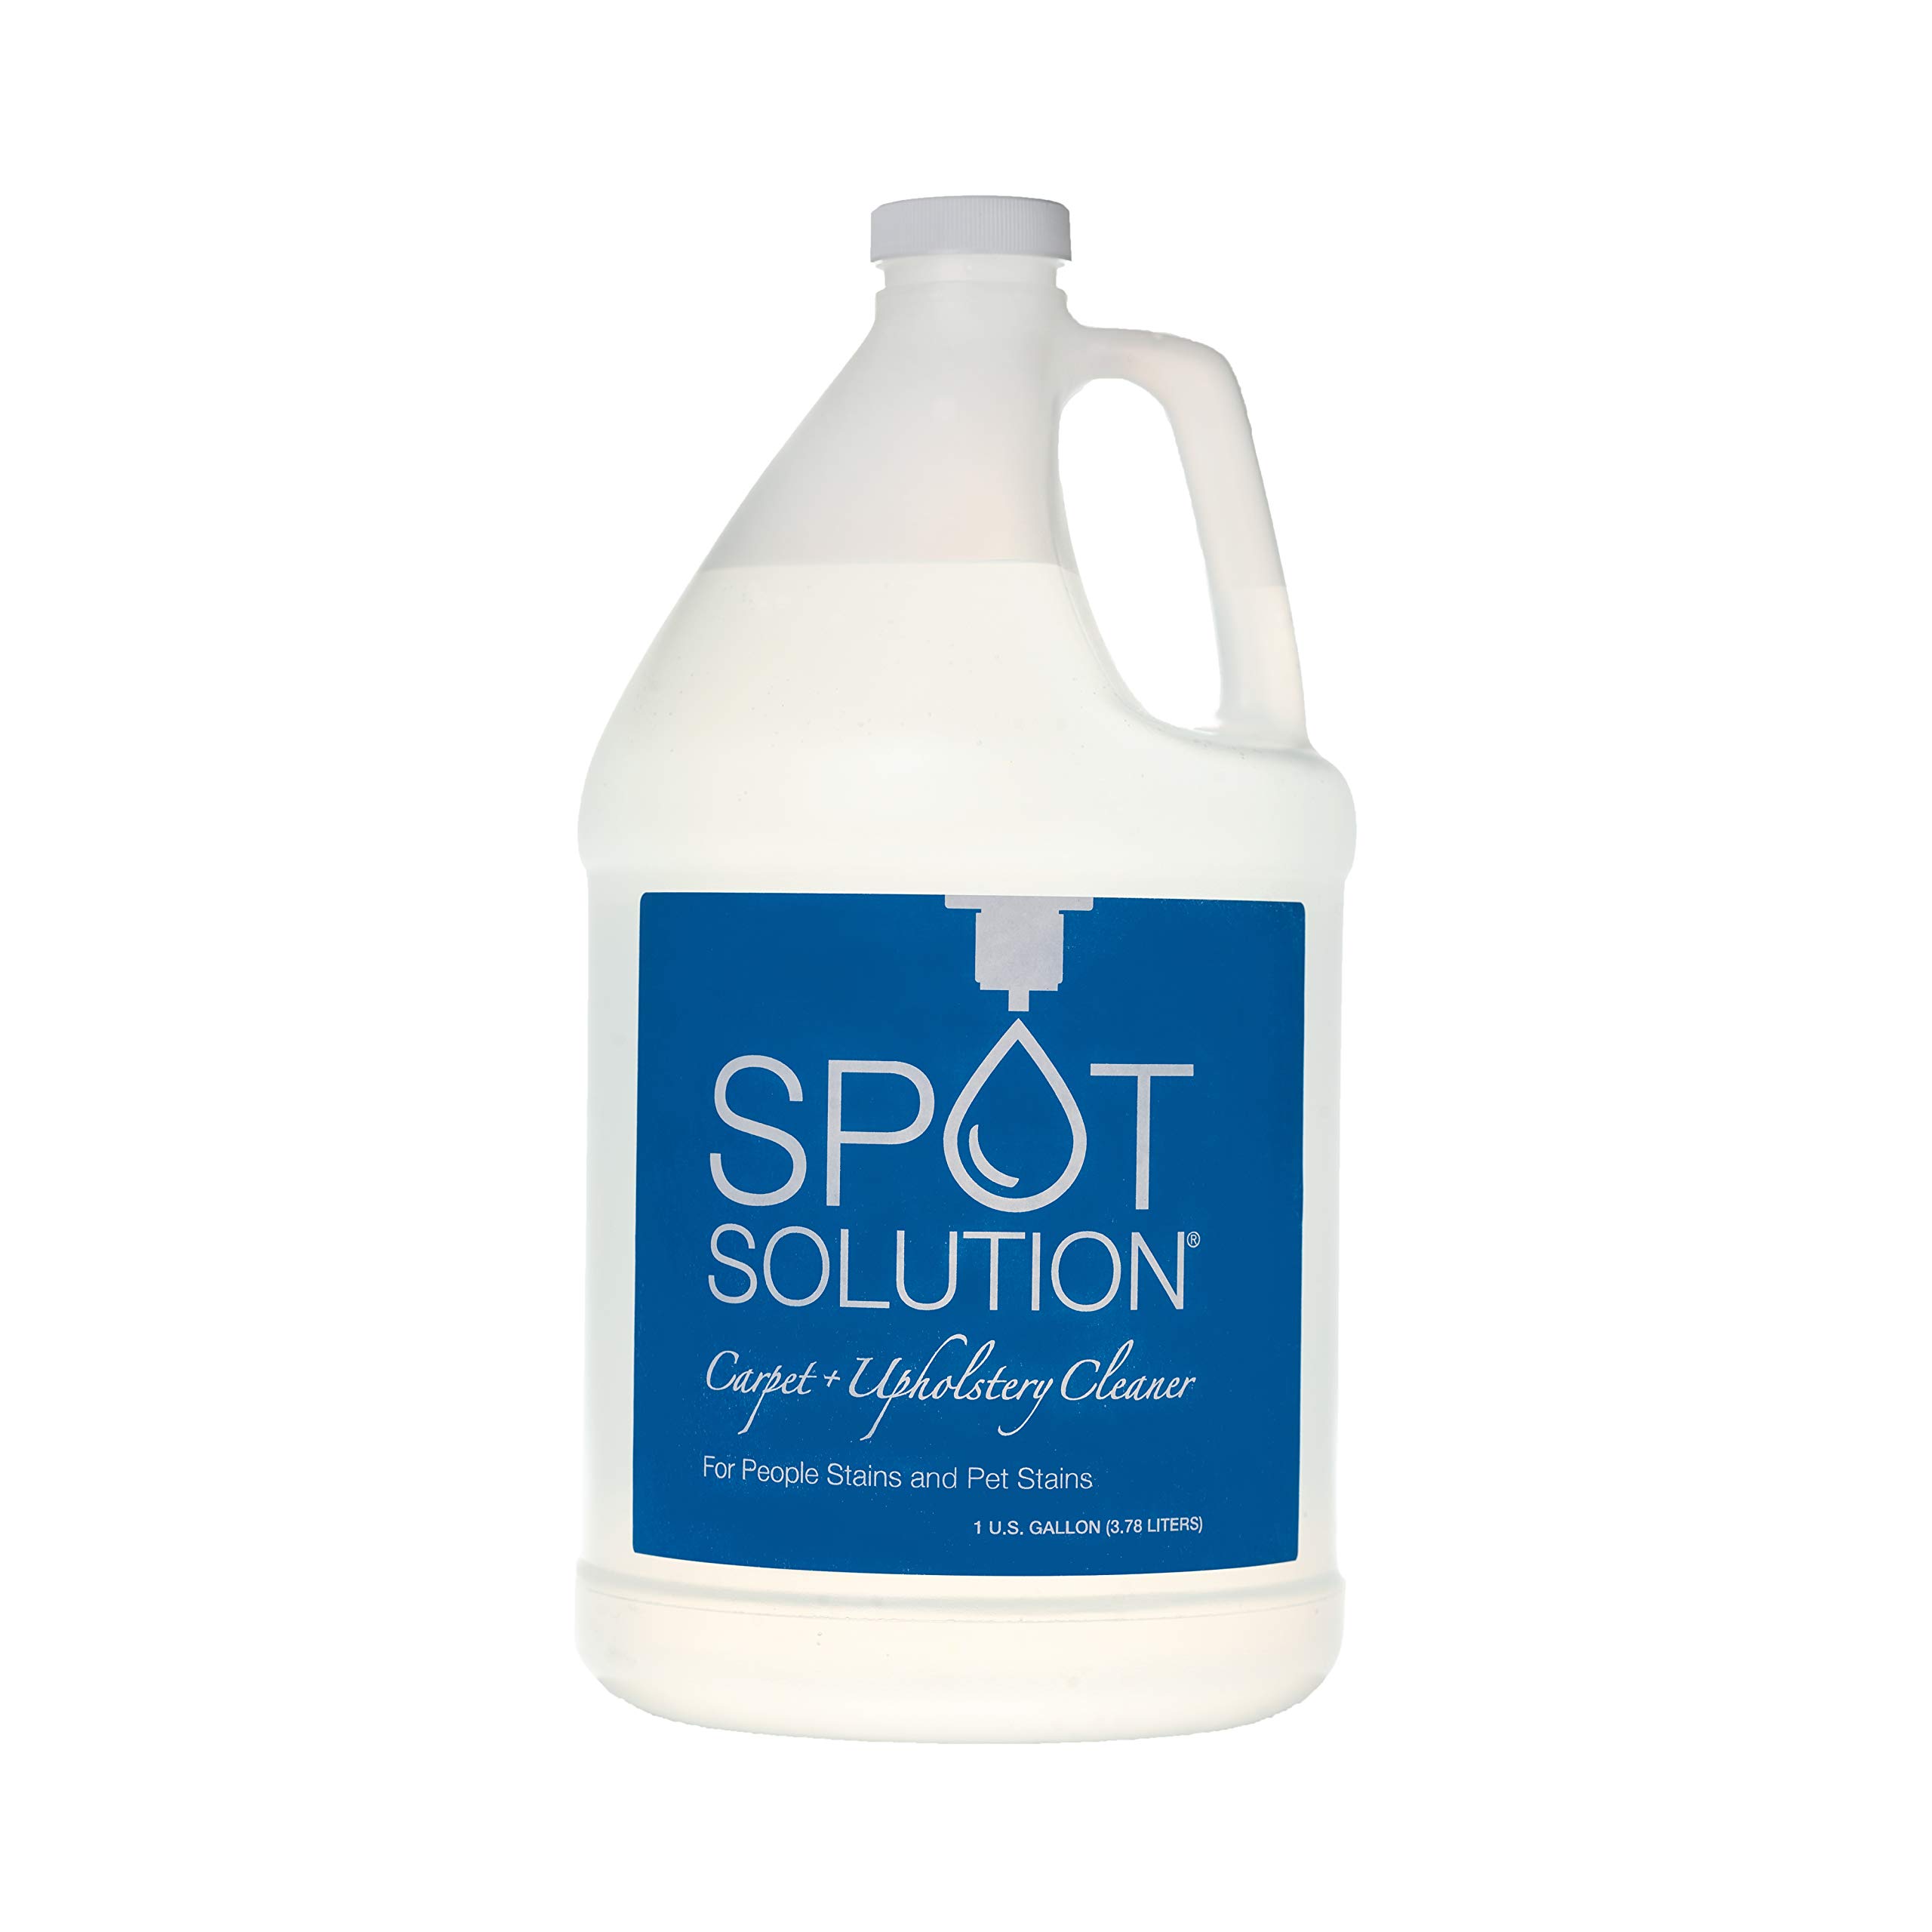 Spot Solution People & Pet Stains, Carpet & Upholstery Cleaner, Concentrated,128 oz (1 Gallon)